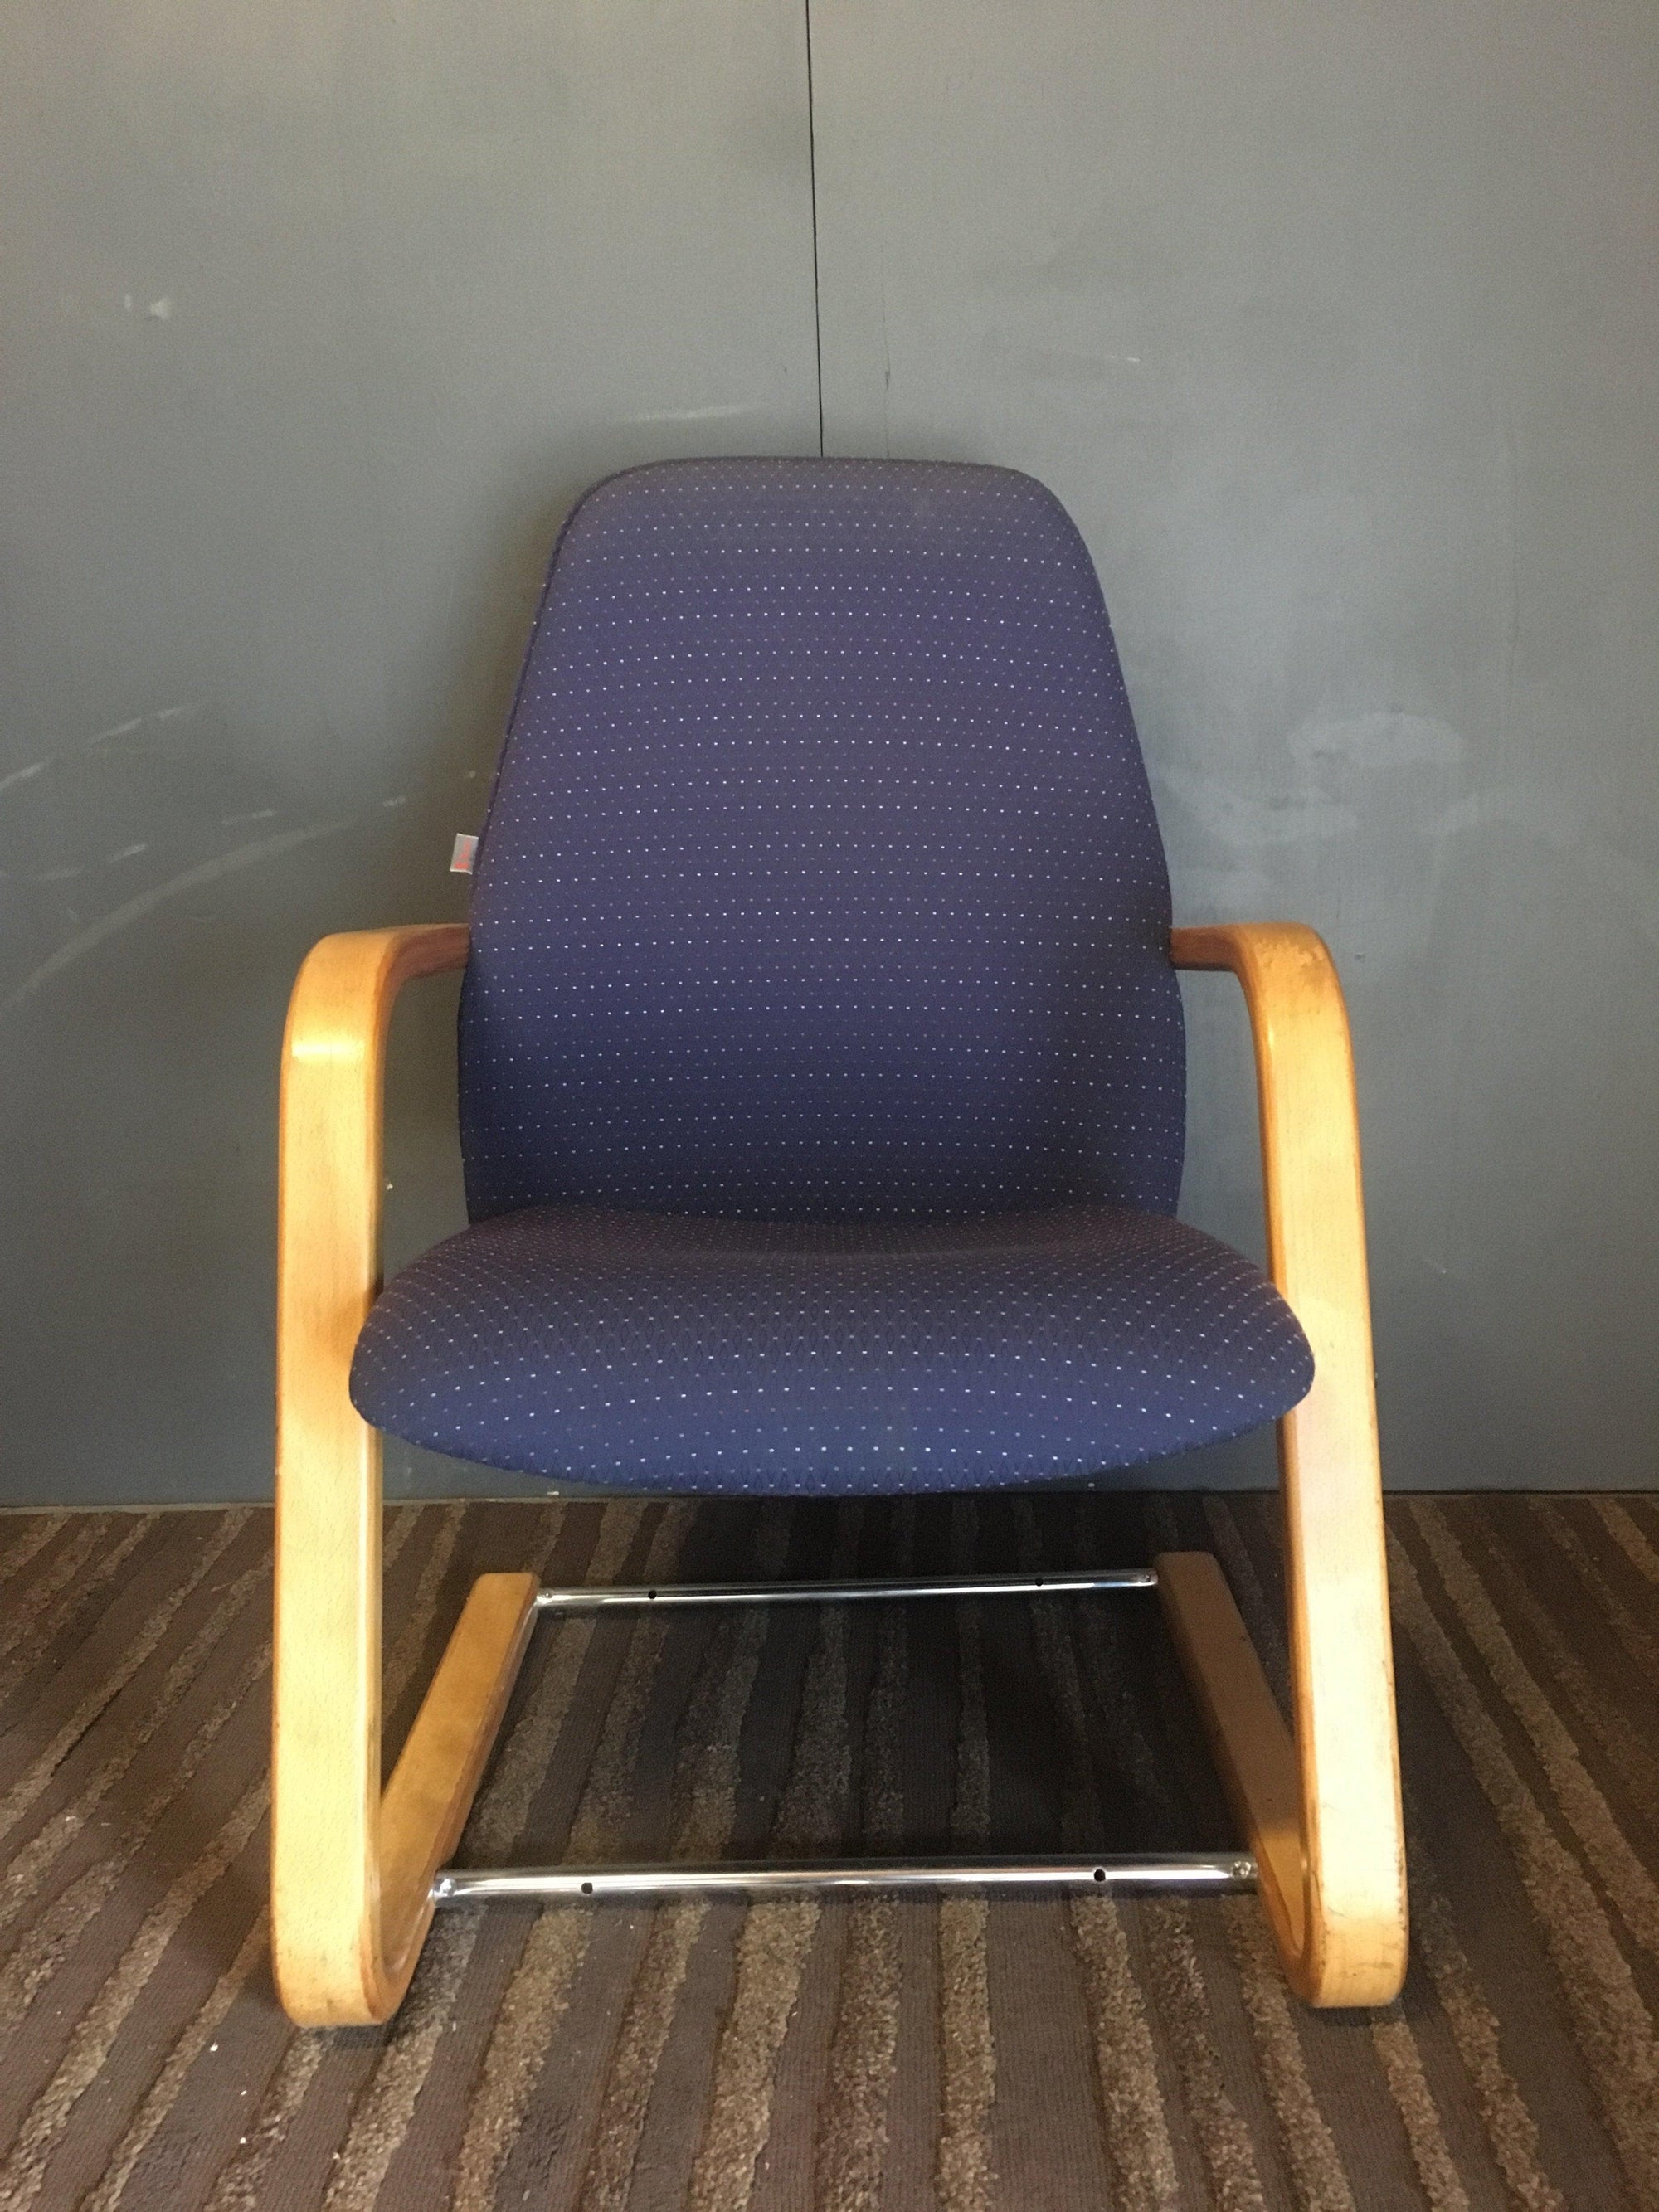 Solid Visitors Chair With Wooden Arms - 2ndhandwarehouse.com